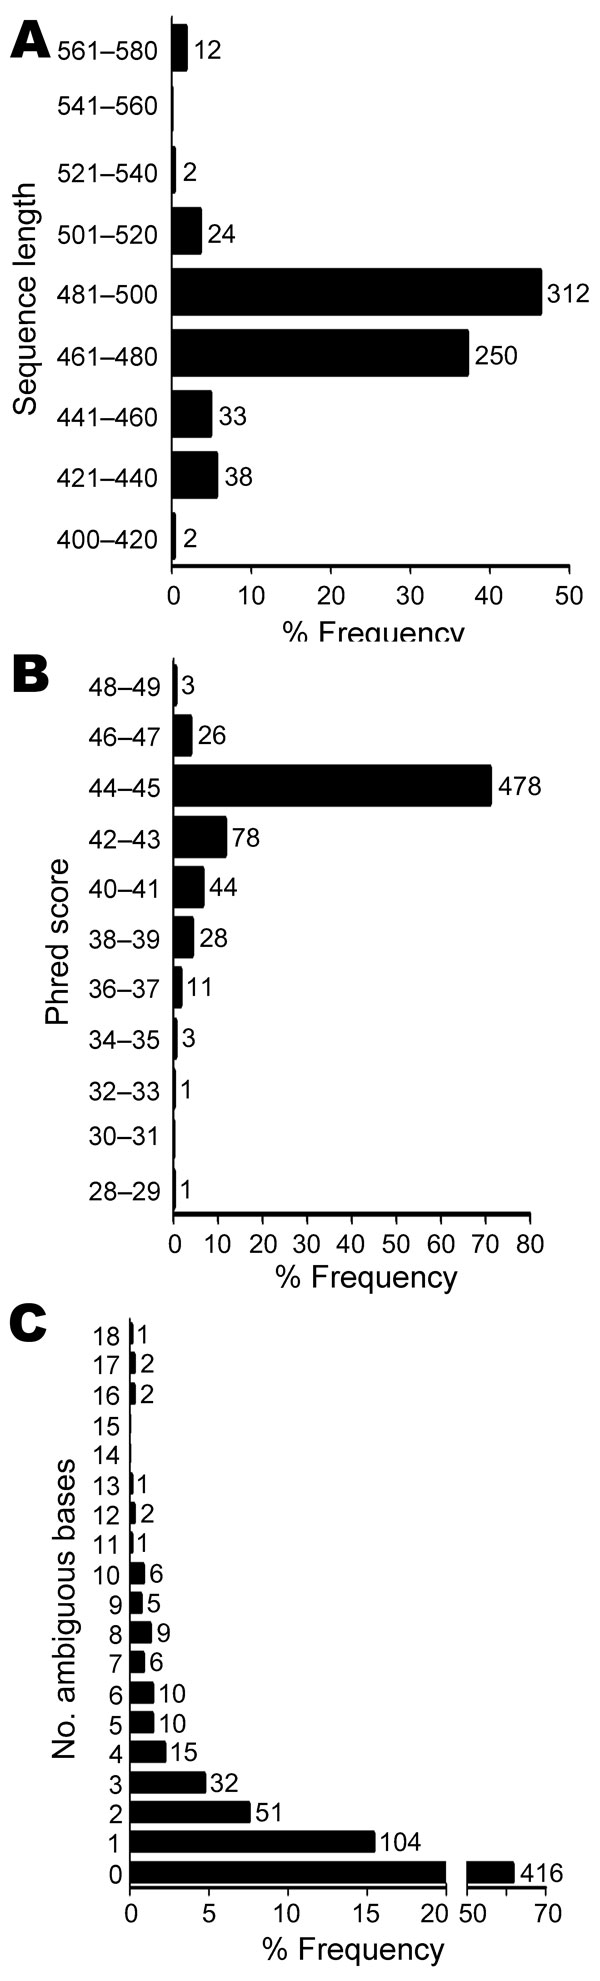 Sequence quality and number of ambiguous bases for 673 unidentified bacterial isolates. The median sequence length was 480 bases, with 84% of sequences in the range of 461 to 500 bases (A). The median phred sequence quality score was 45 (B). Most sequences had no ambiguous positions (n = 416, 61.8%). Up to 18 ambiguous positions were seen in isolates with multiple, nonidentical copies of the 16S rRNA gene (C). The y-axis indicates relative frequency in percent. Numbers above columns represent is